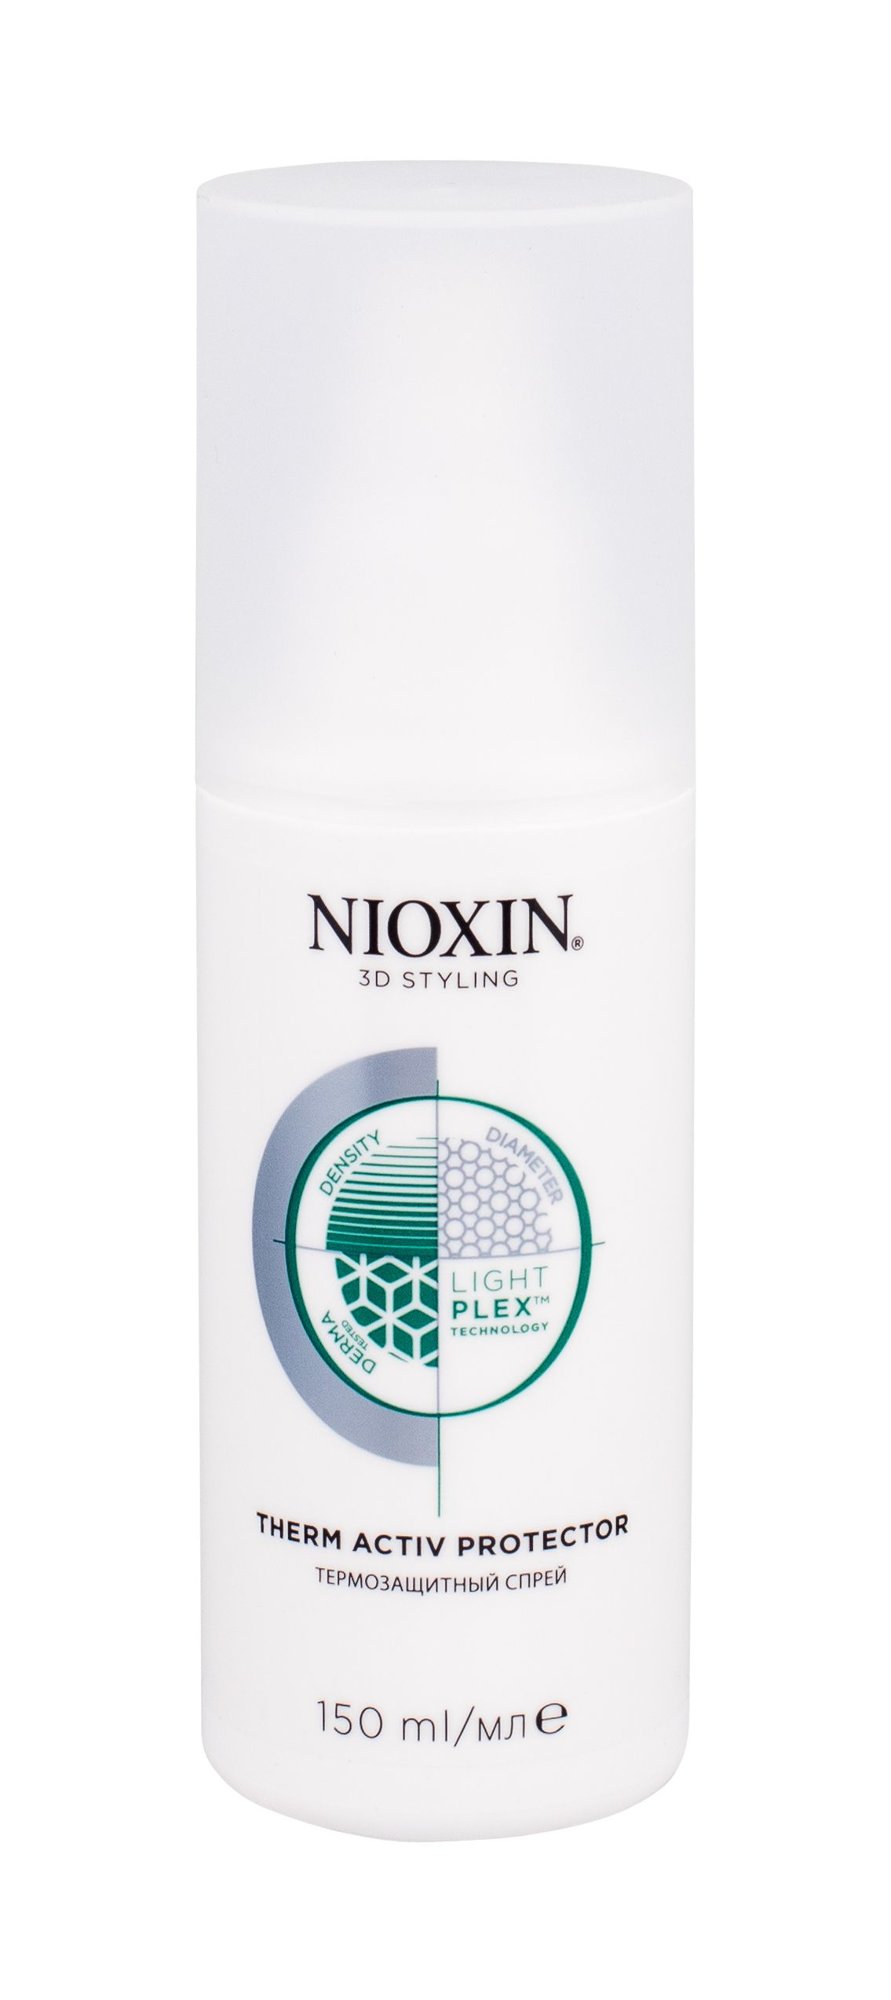 Nioxin 3D Styling Light Plex Therm Active Protector